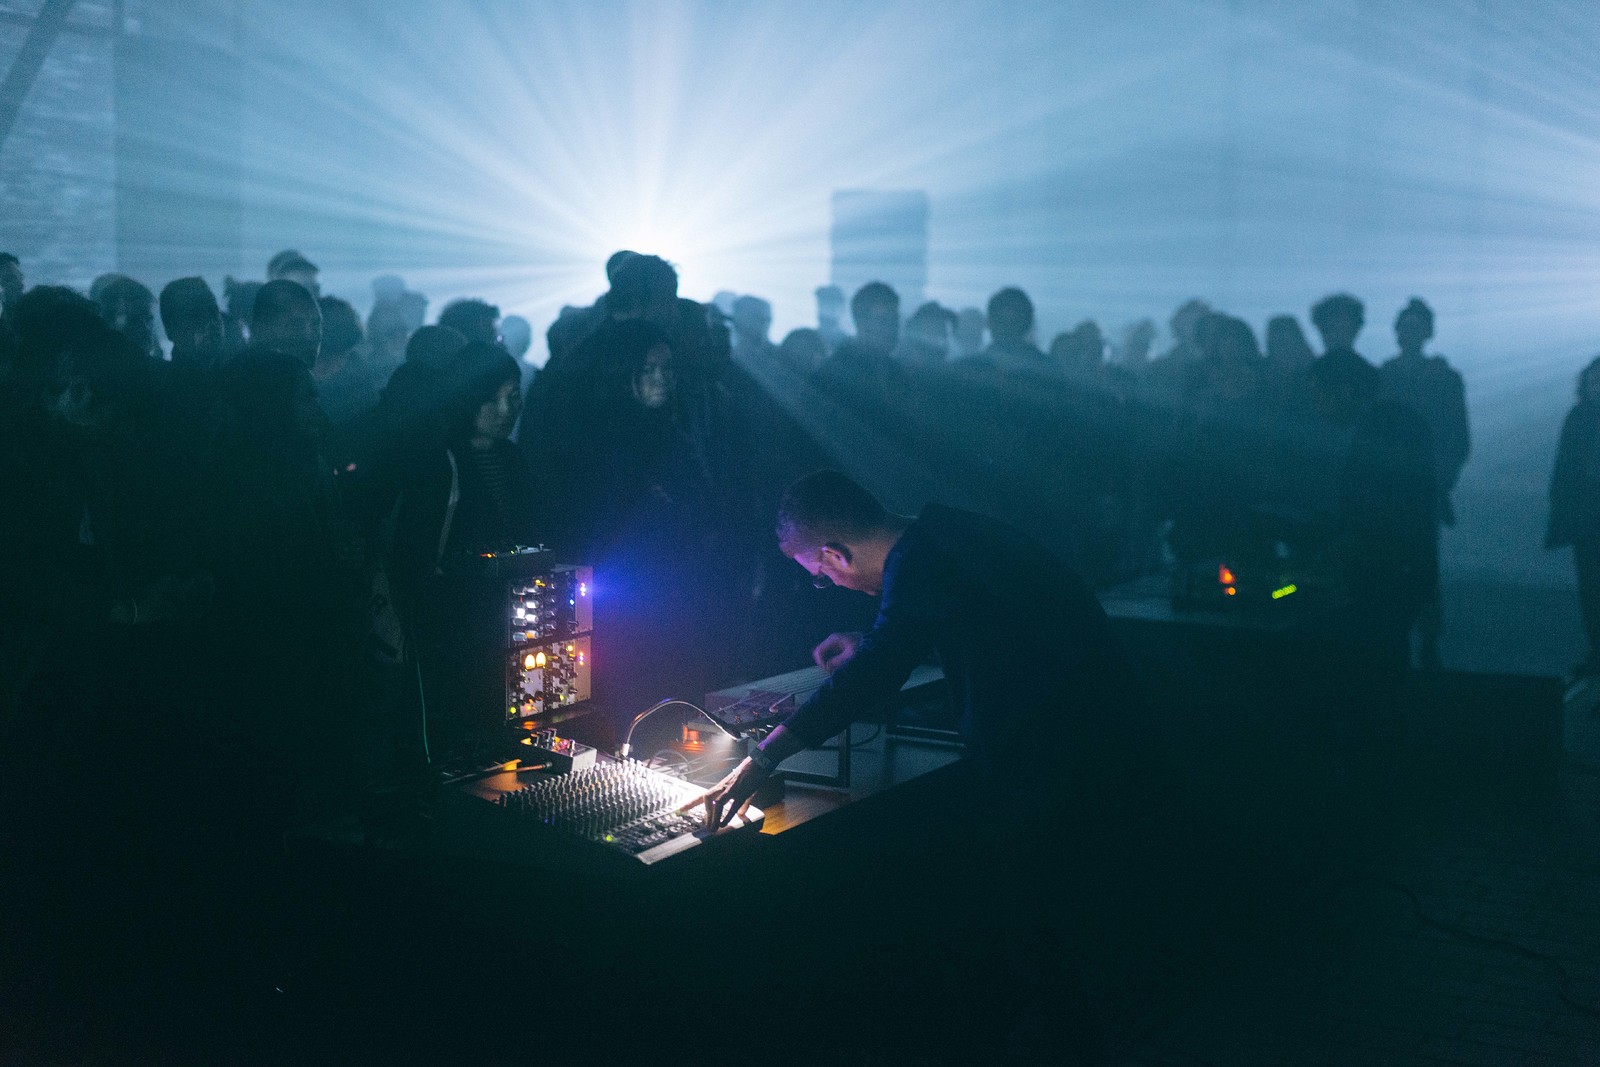 Room 237 Presents Emptyset / Kangding Ray & more at Arnolfini